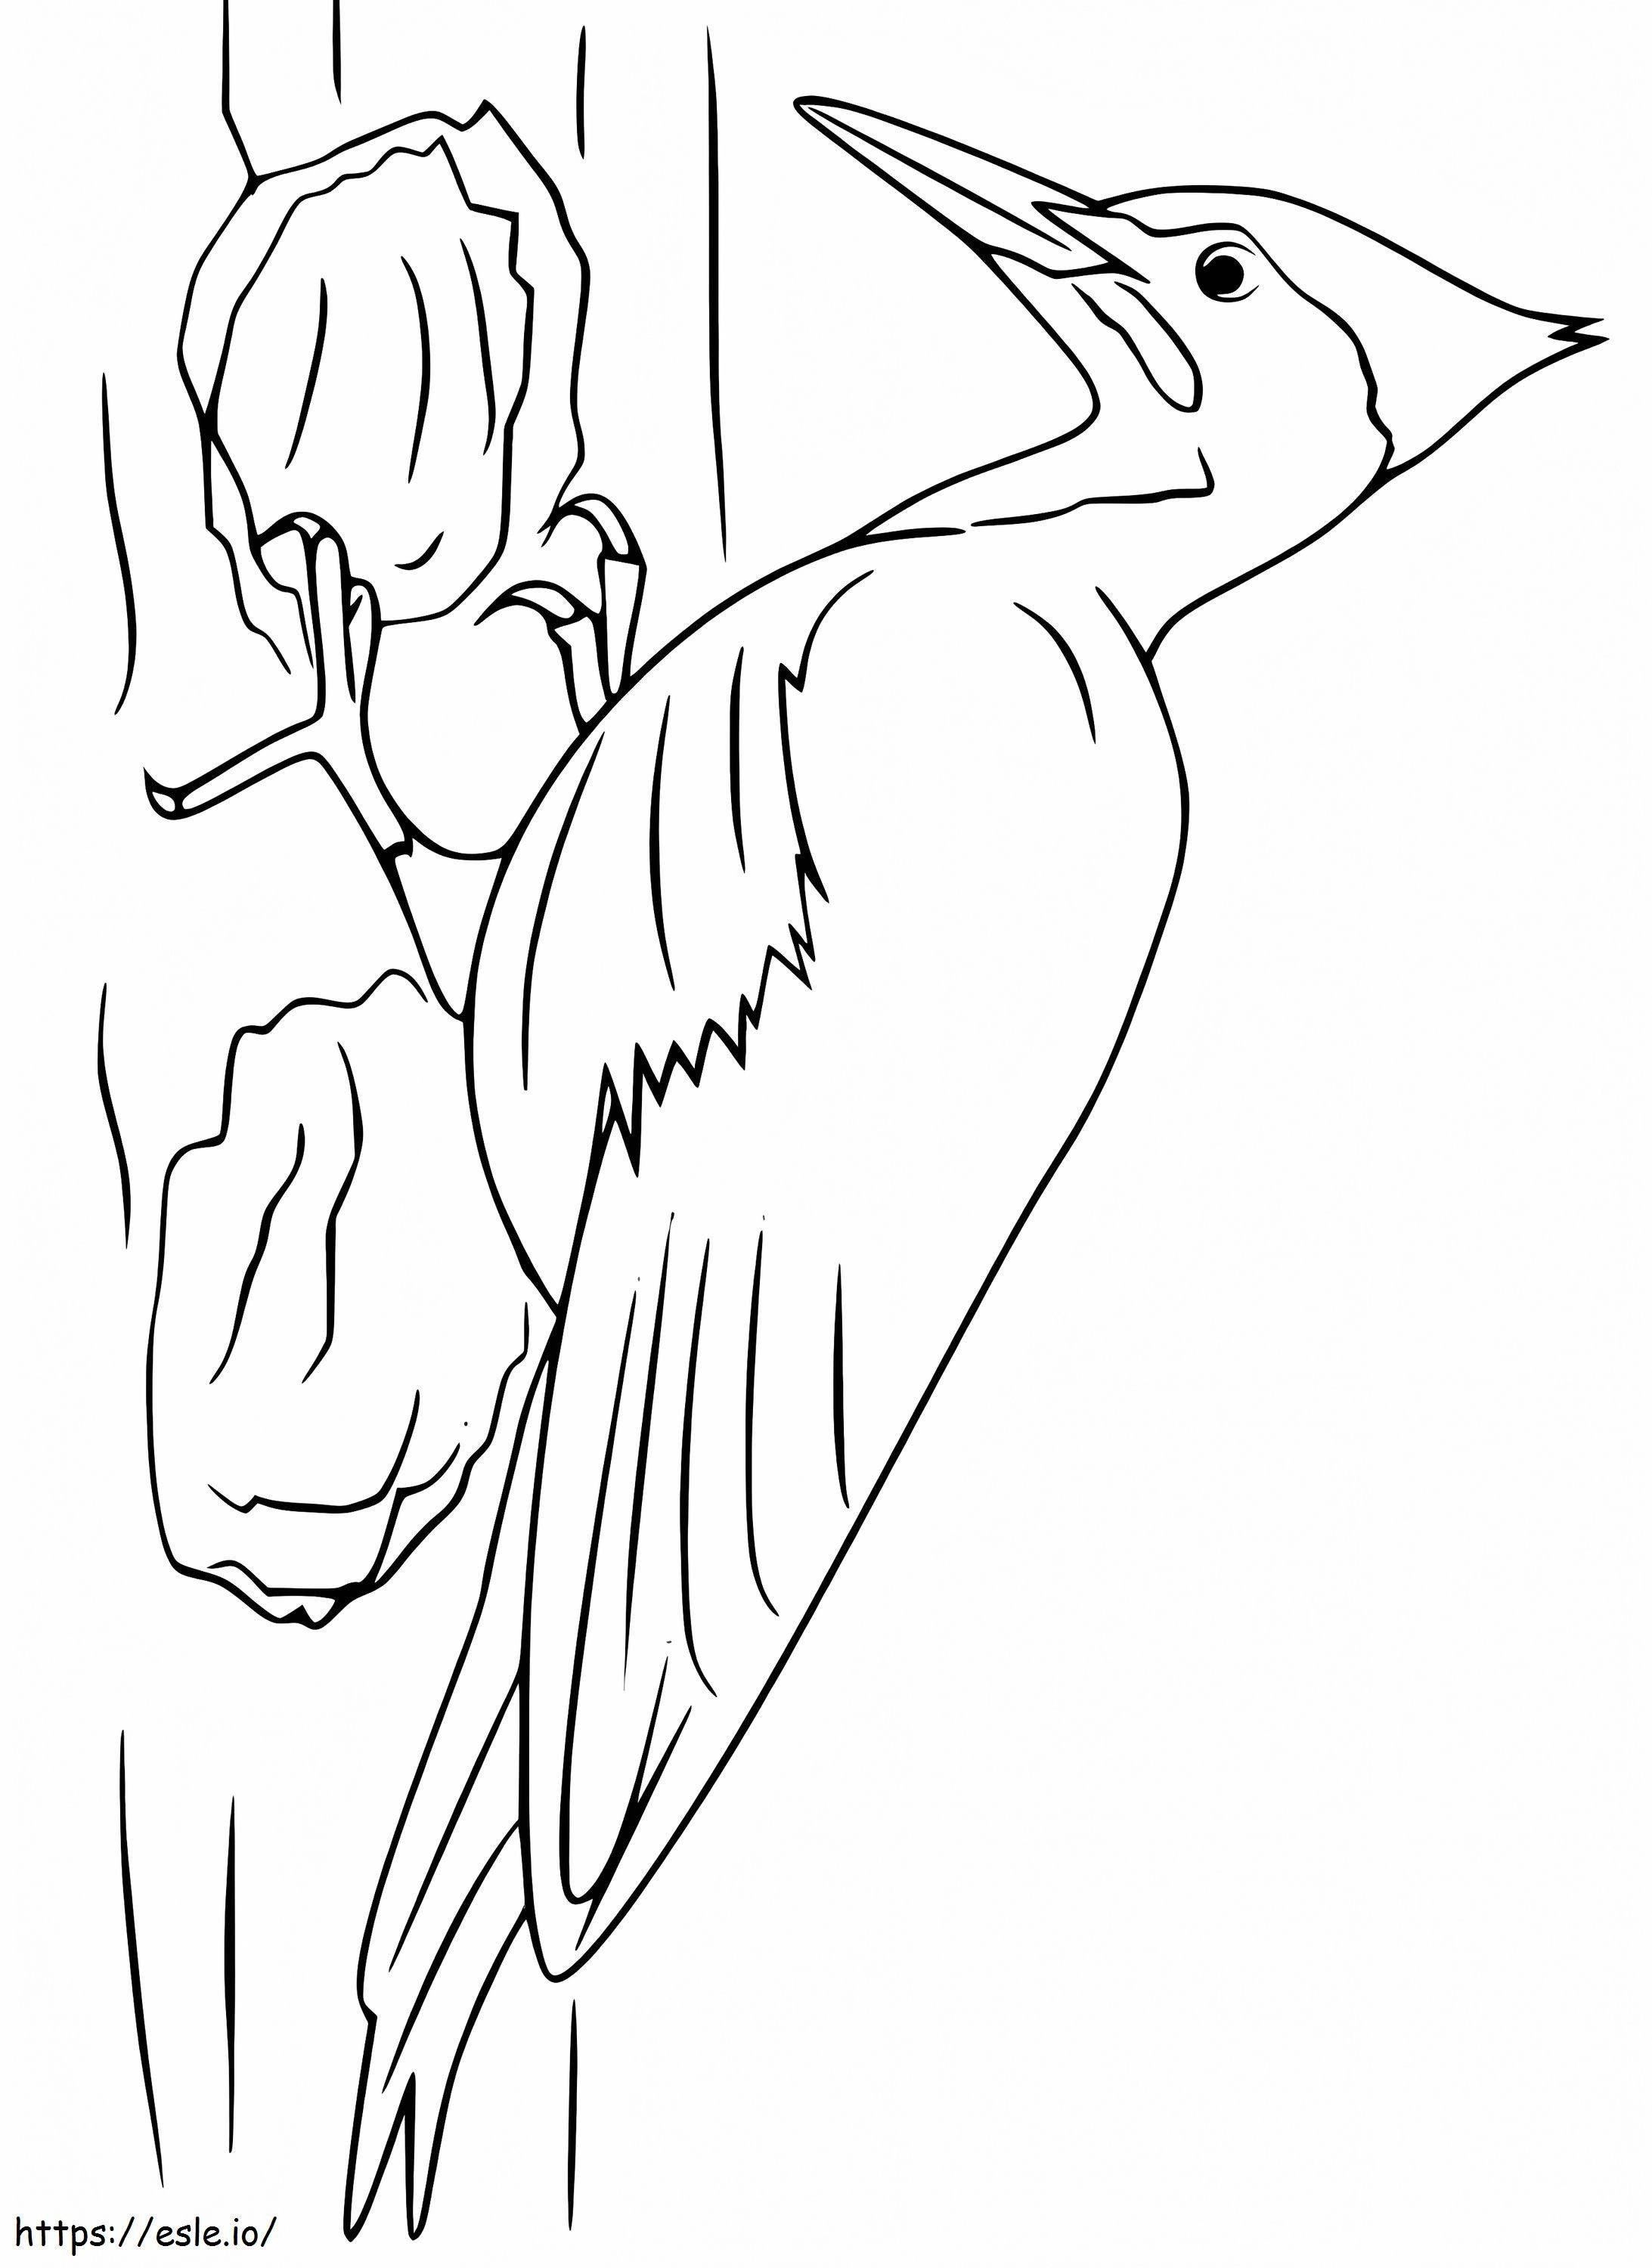 Woodpecker 6 coloring page